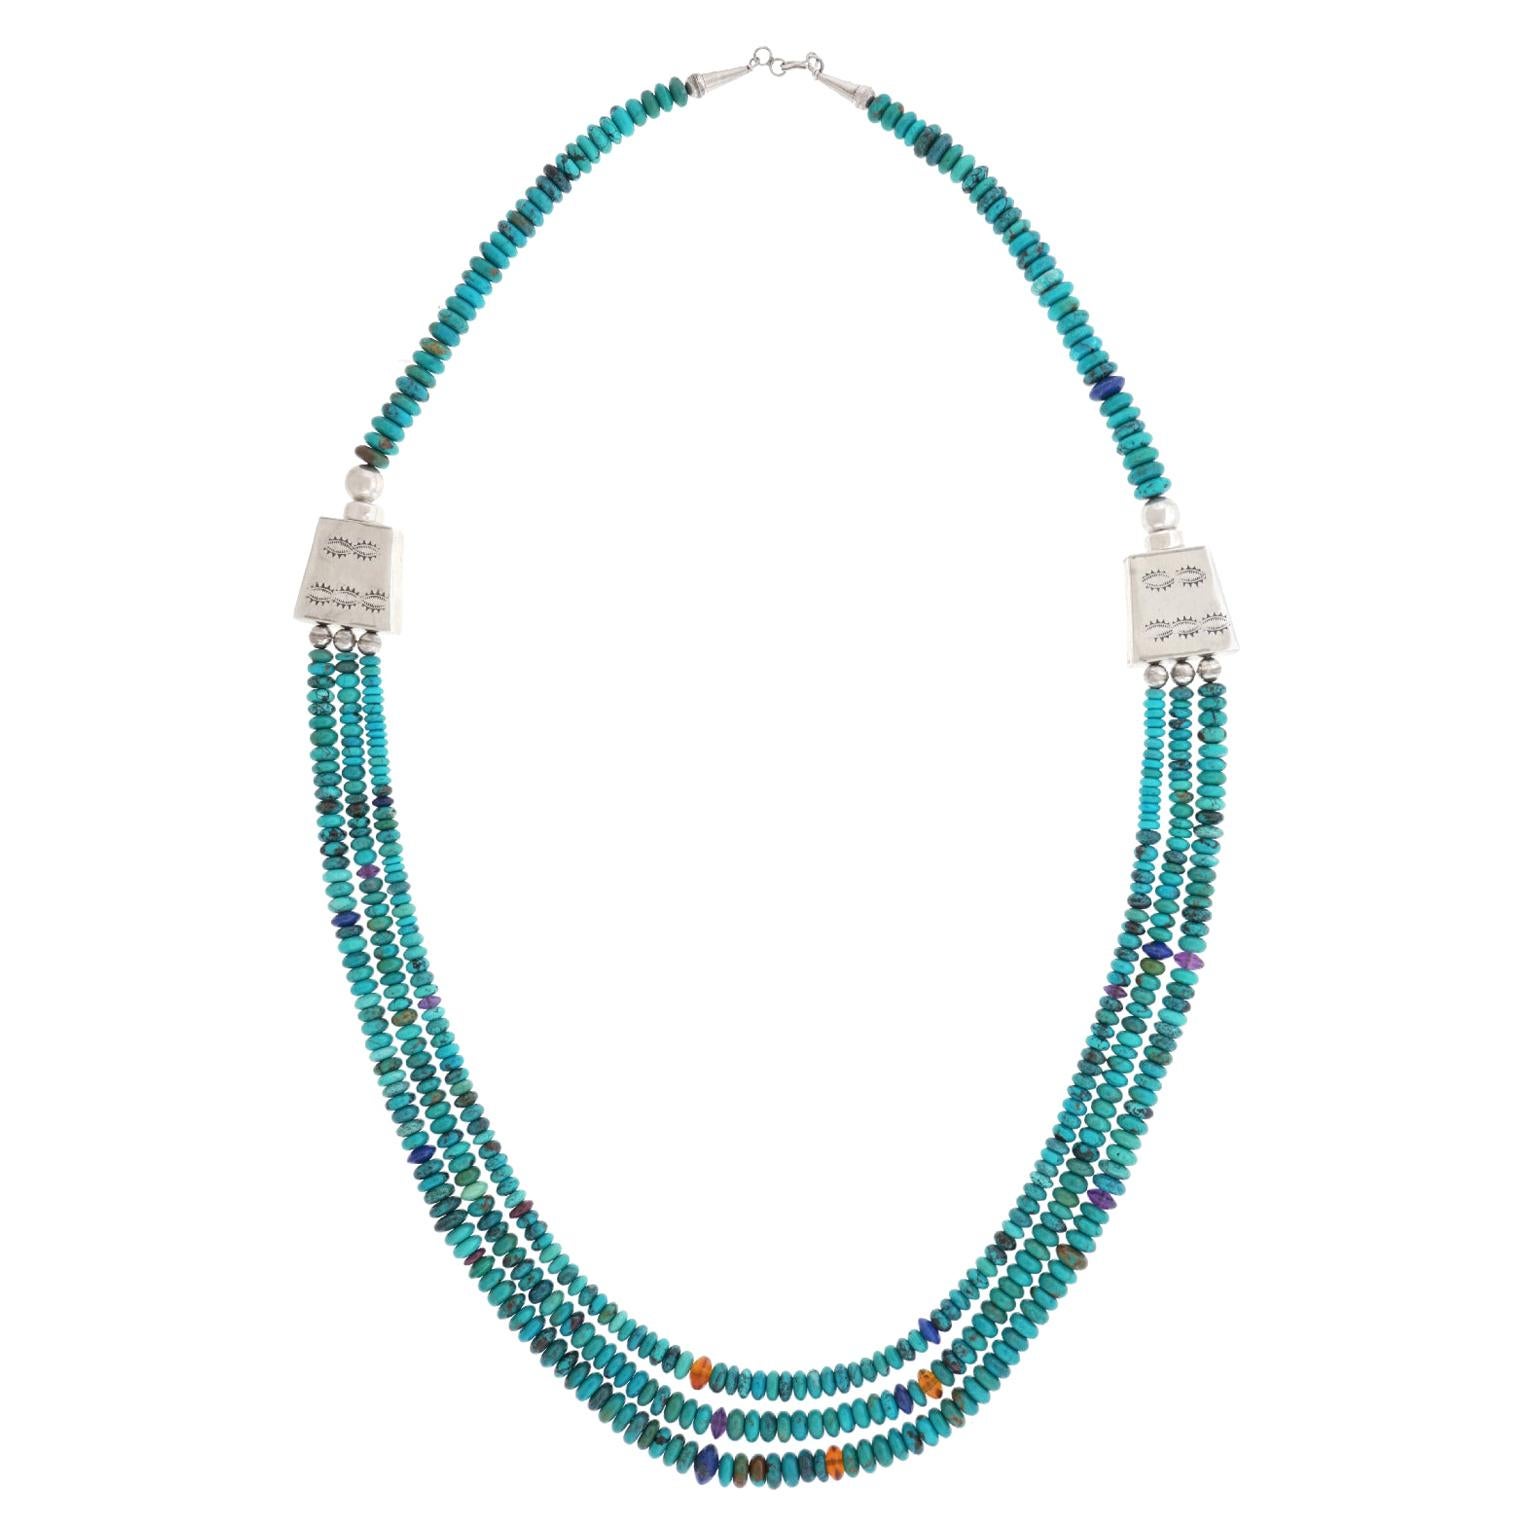 Turquoise Necklace by Roie Jacque, Navajo